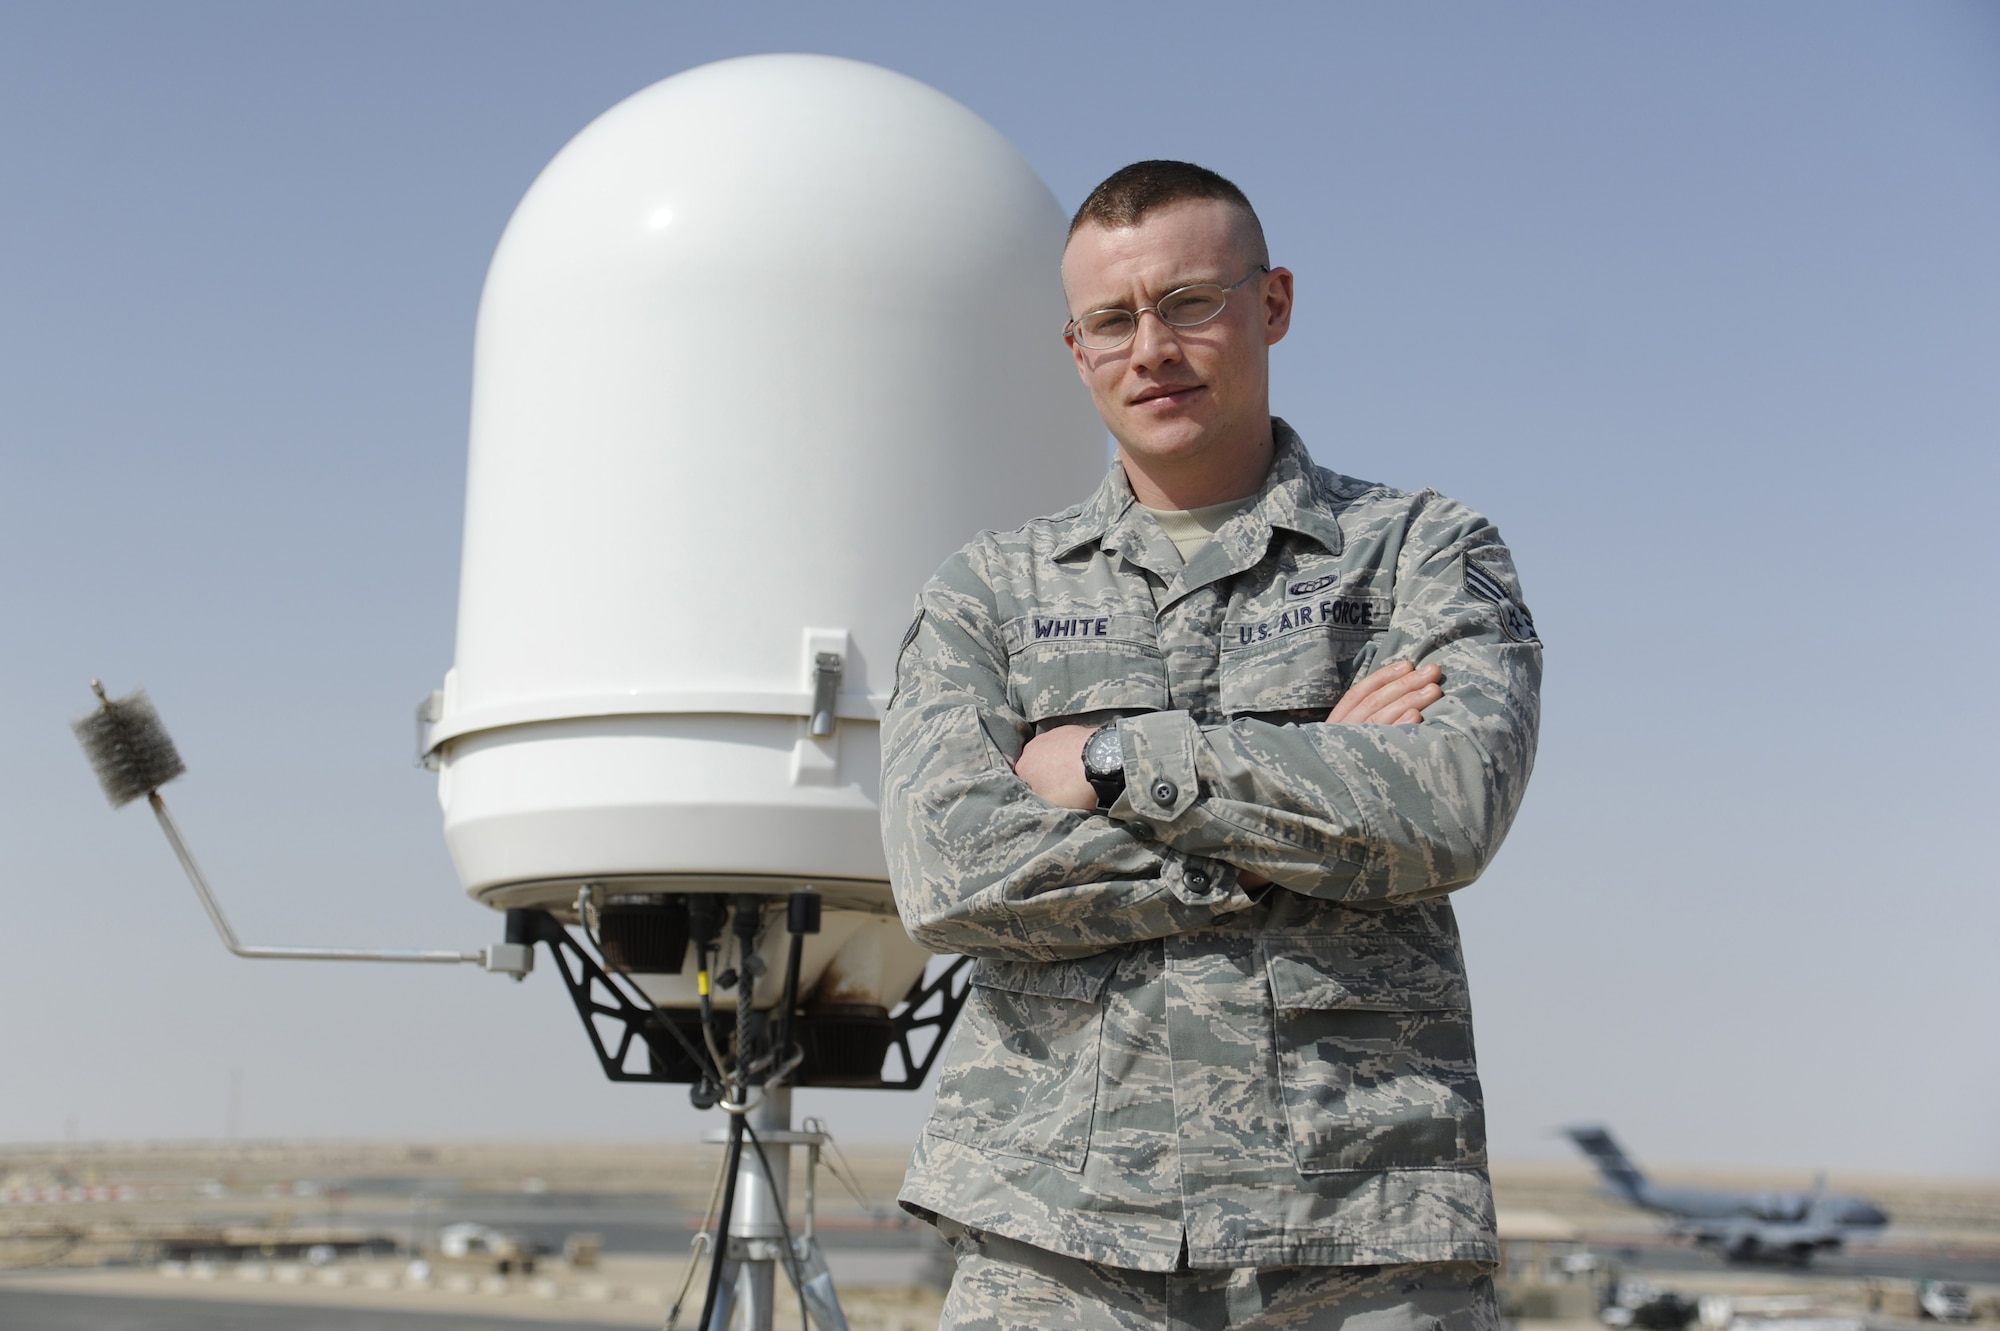 Senior Airman Erik White, 386th Expeditionary Operations Support Squadron, performs his duty as a weather forecaster next to the wings newly installed portable Doppler radar at the 386th Air Expeditionary Wing, Southwest Asia May 4, 2013. White was awarded this weeks "Rock Solid Warrior" designation by the 386th Top 3 Council.  White's job is to accurately predict the weather based on current conditions and weather models. "We have less information to work with out here and we have to get back to using some of our fundamental weather forecasting techniques to ensure accurate forecasts. In weather moisture plays a major role in what type of weather is seen or not seen." (U.S Air Force photo by Staff Sgt. Austin Knox)